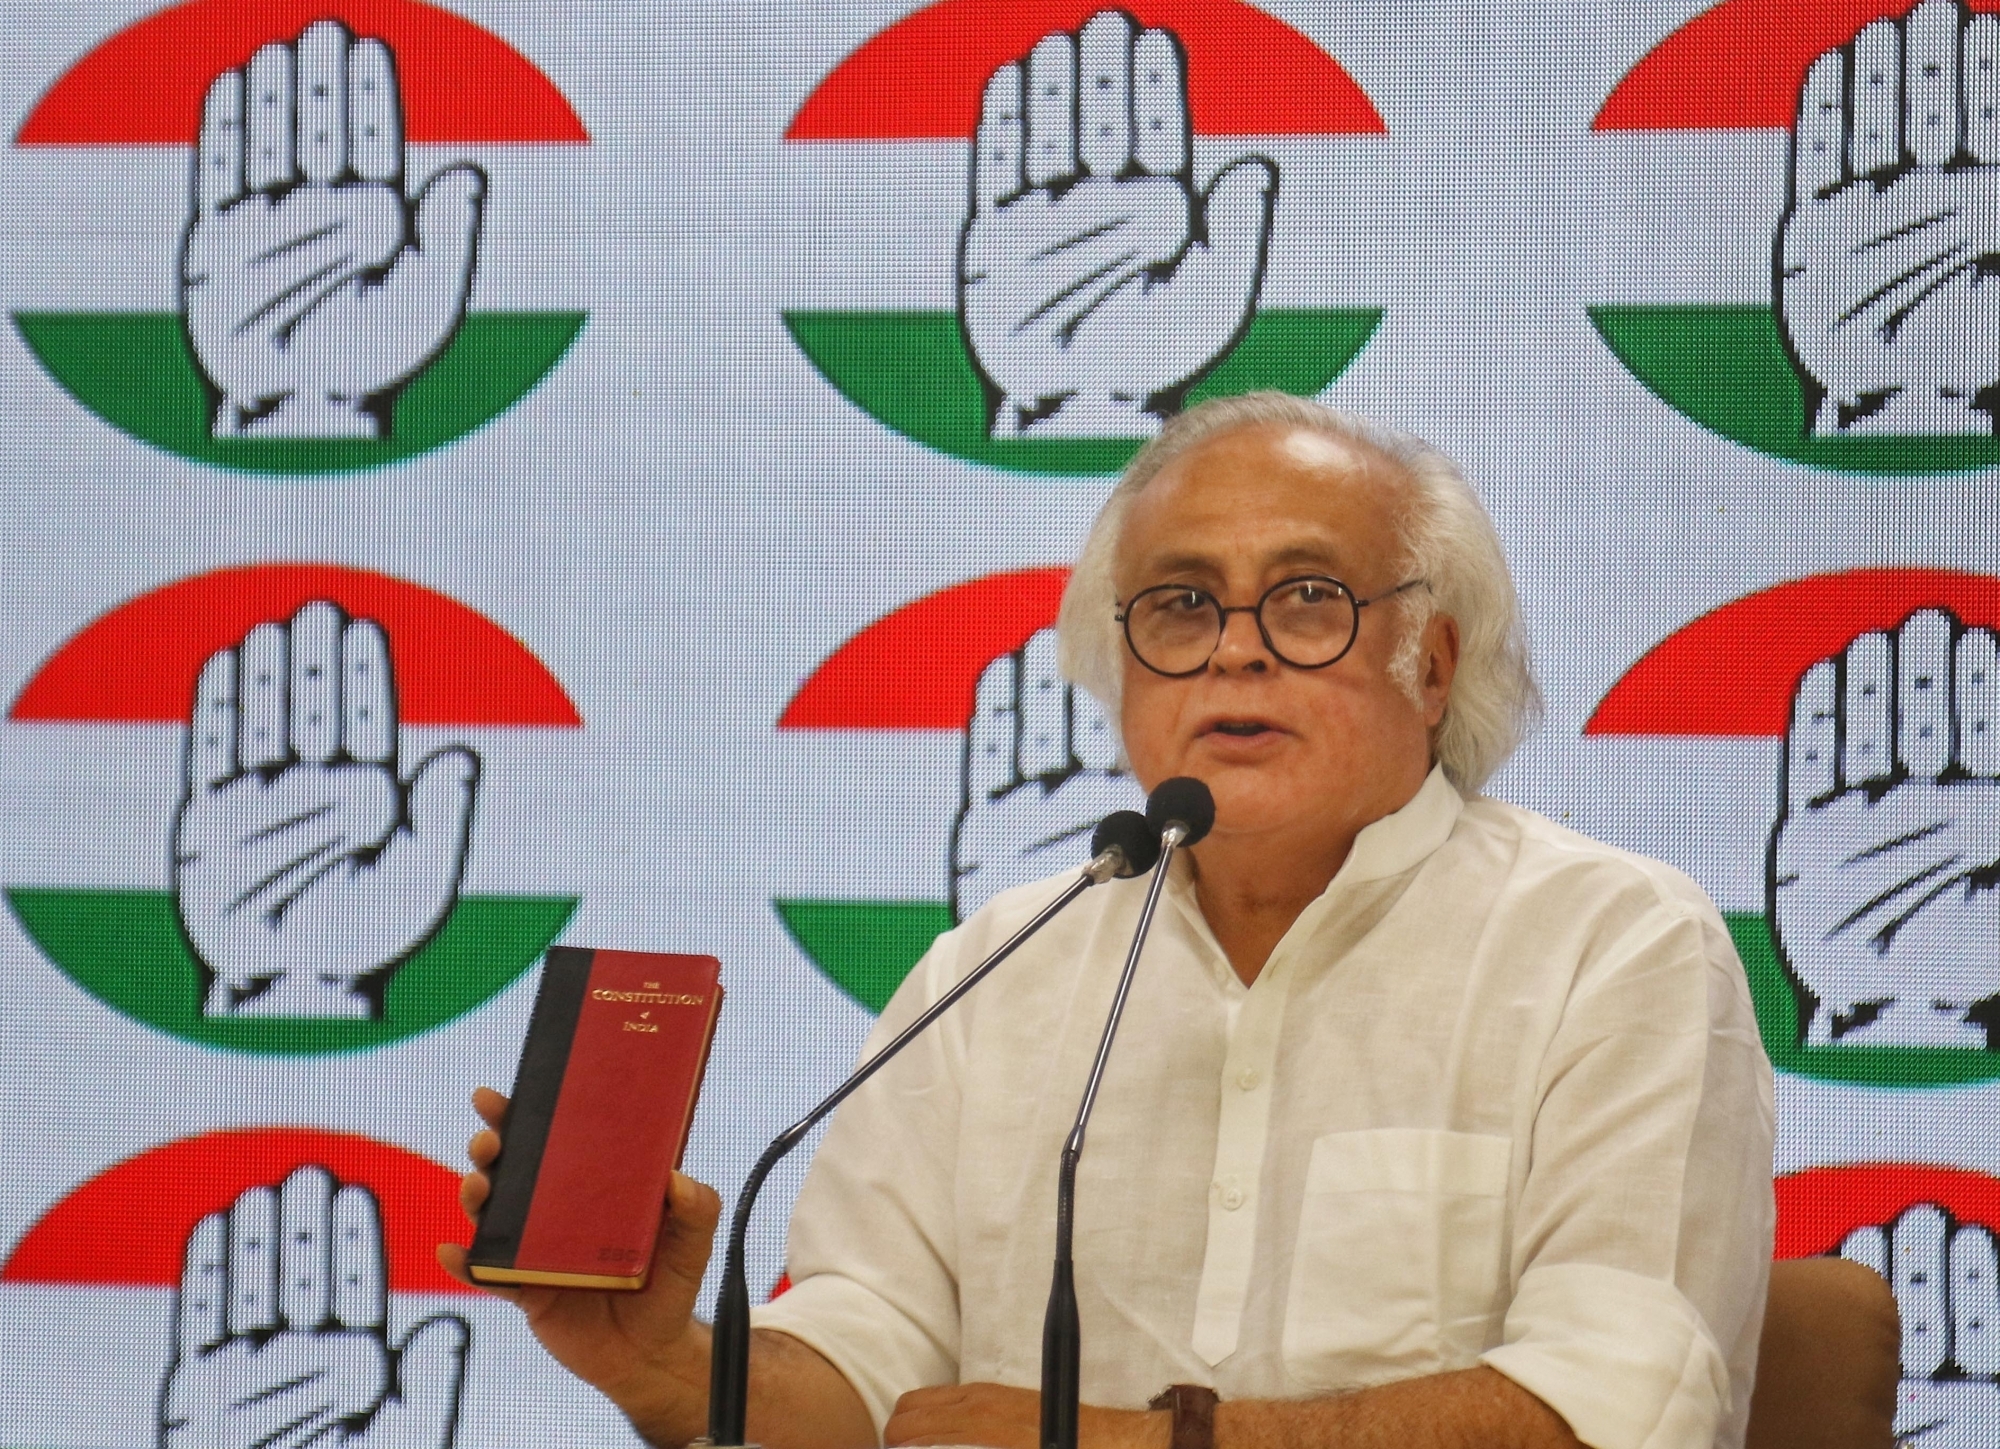  Congress Questions Delay In Centre's Action To Restore Normalcy In Manipur-TeluguStop.com